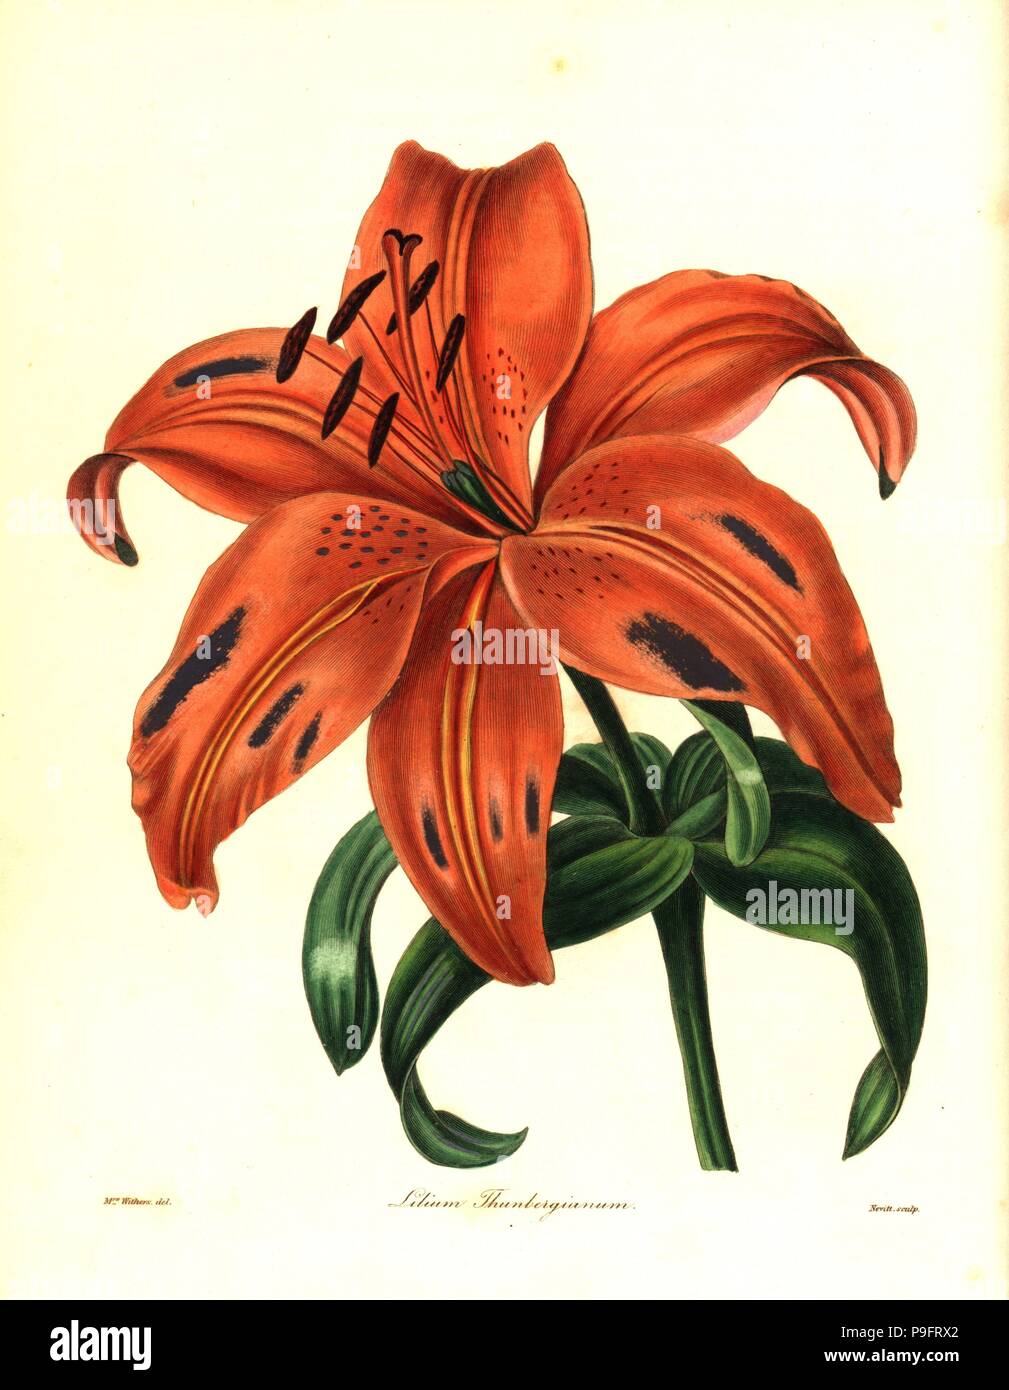 Japanese lily or sukashiyuri, Lilium maculatum (Thunberg's lily, Lilium thunbergianum). Handcoloured copperplate engraving by S. Nevitt after a botanical illustration by Mrs Augusta Withers from Benjamin Maund and the Rev. John Stevens Henslow's The Botanist, London, 1836. Stock Photo